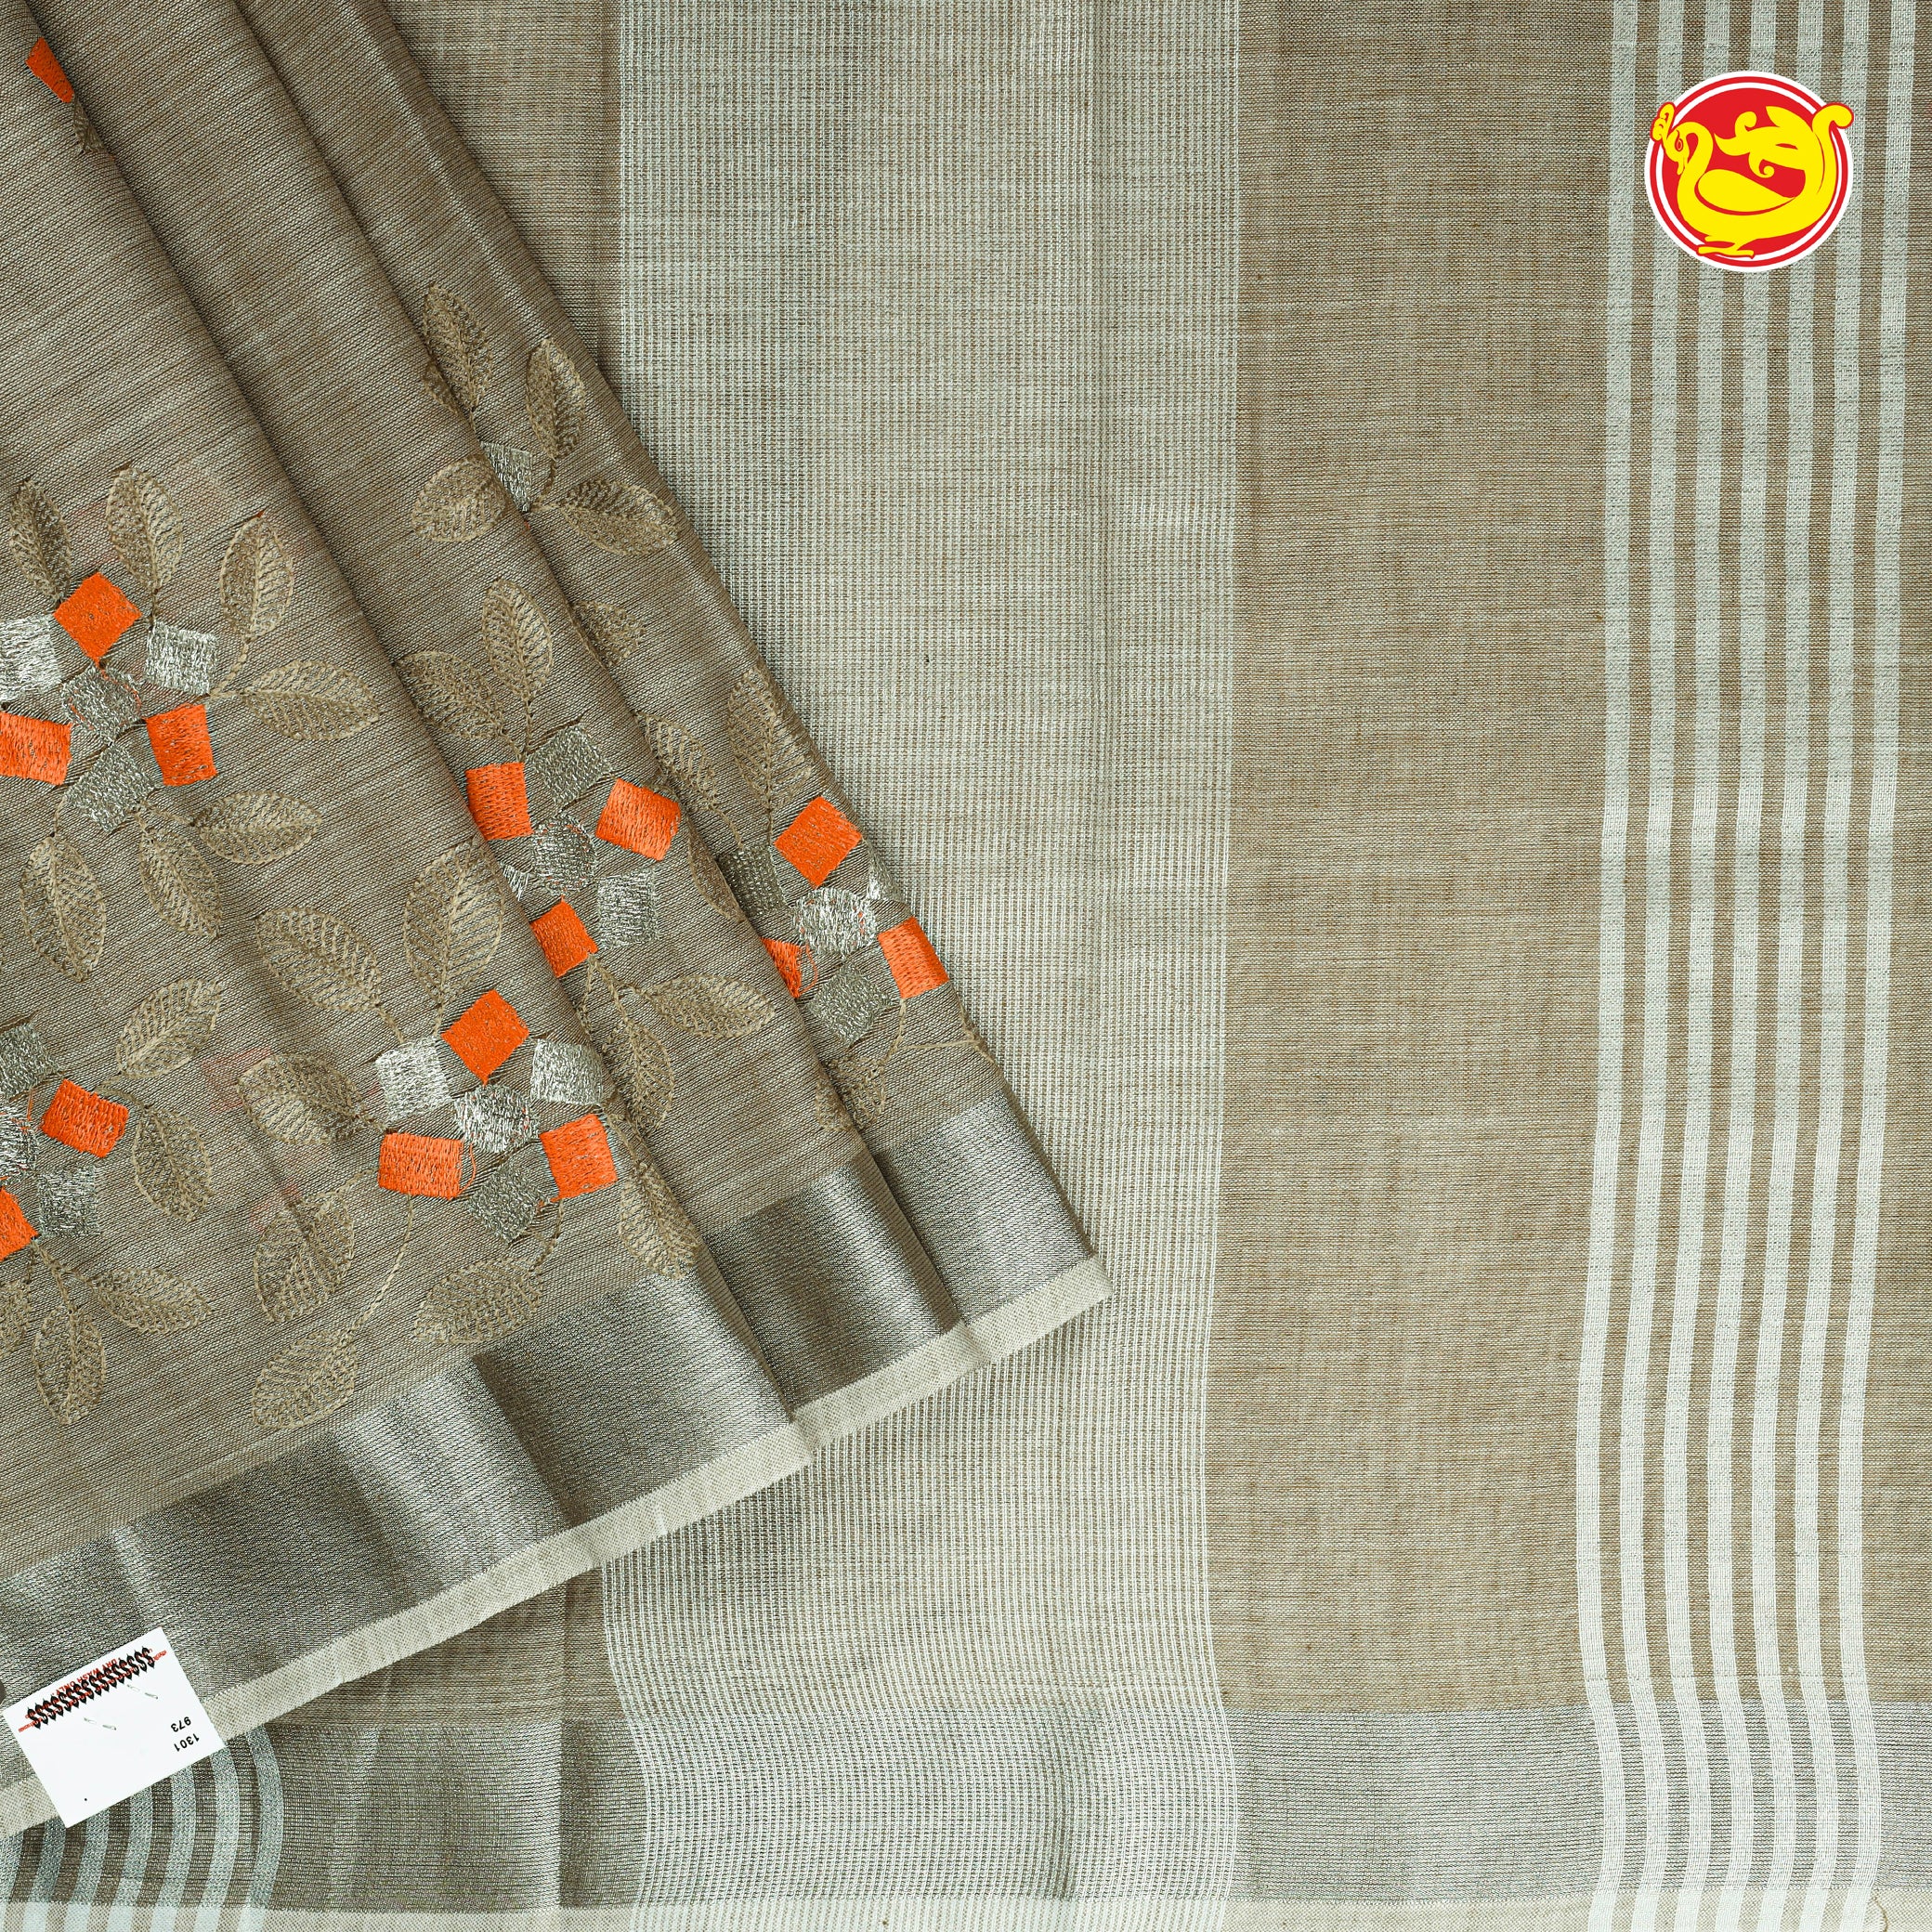 Grey linen cotton saree with embroidery